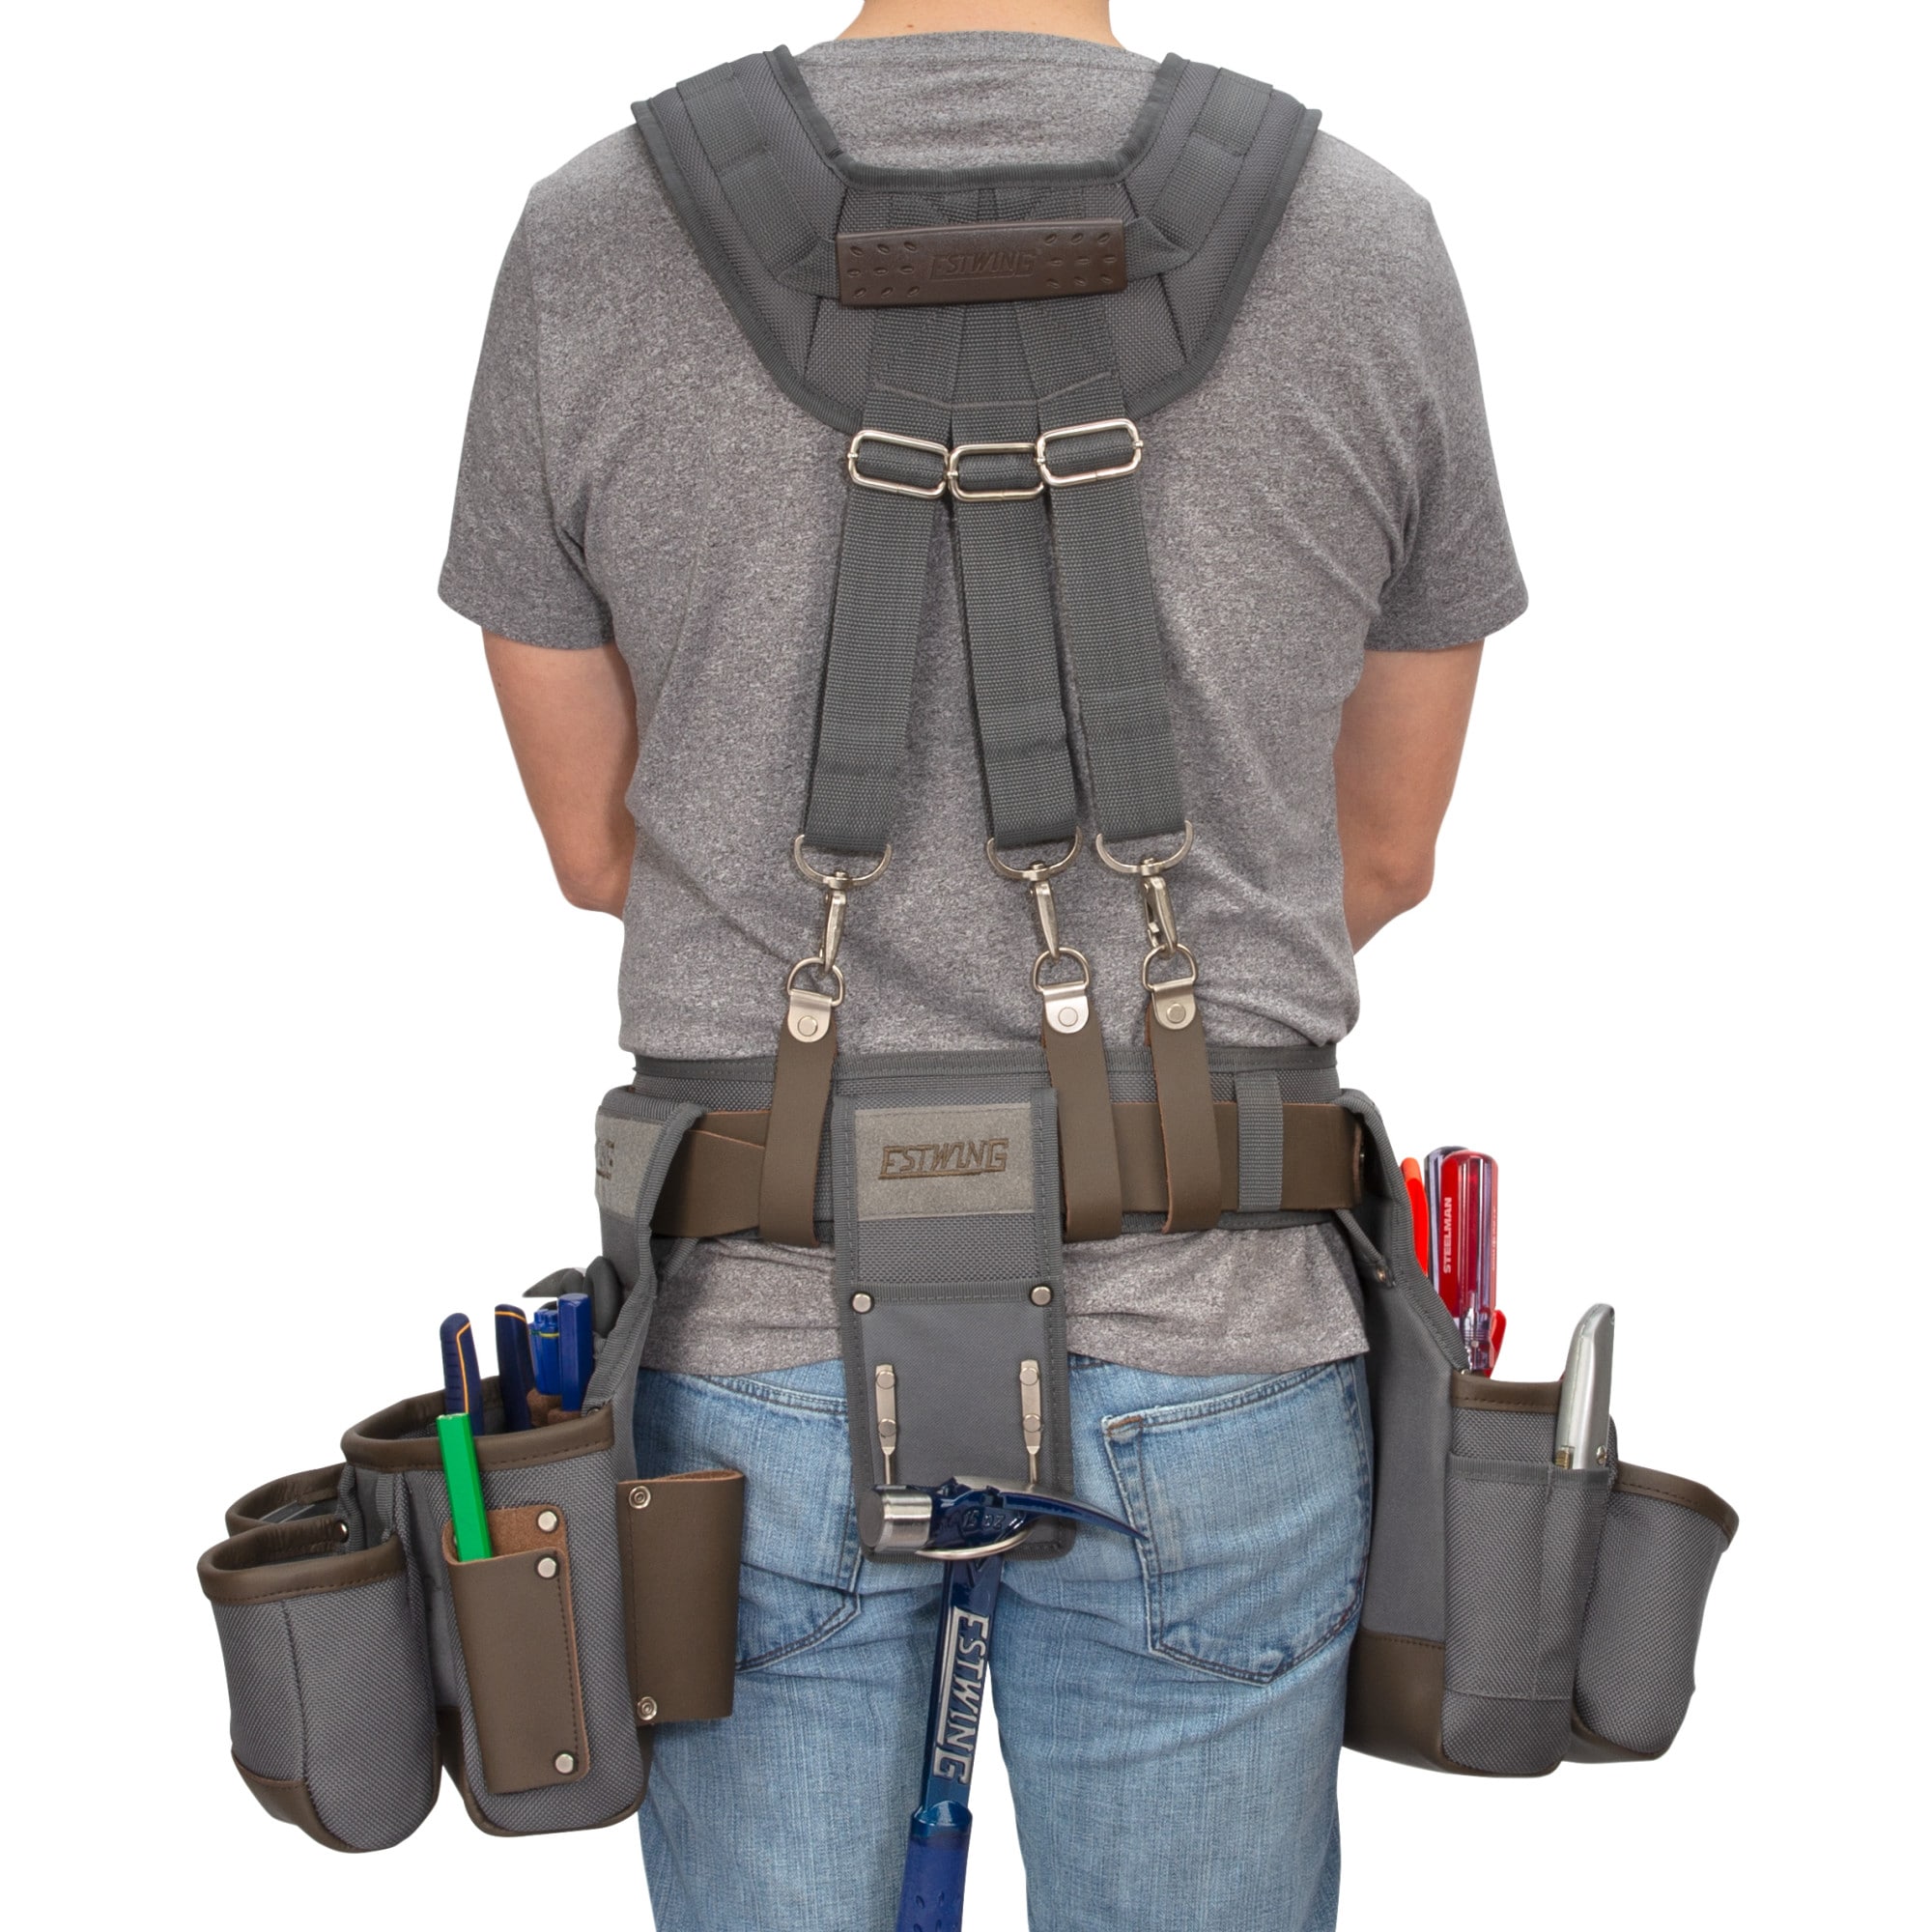 Estwing Framer Polyester Suspension Tool Rig in the Tool Belts ...